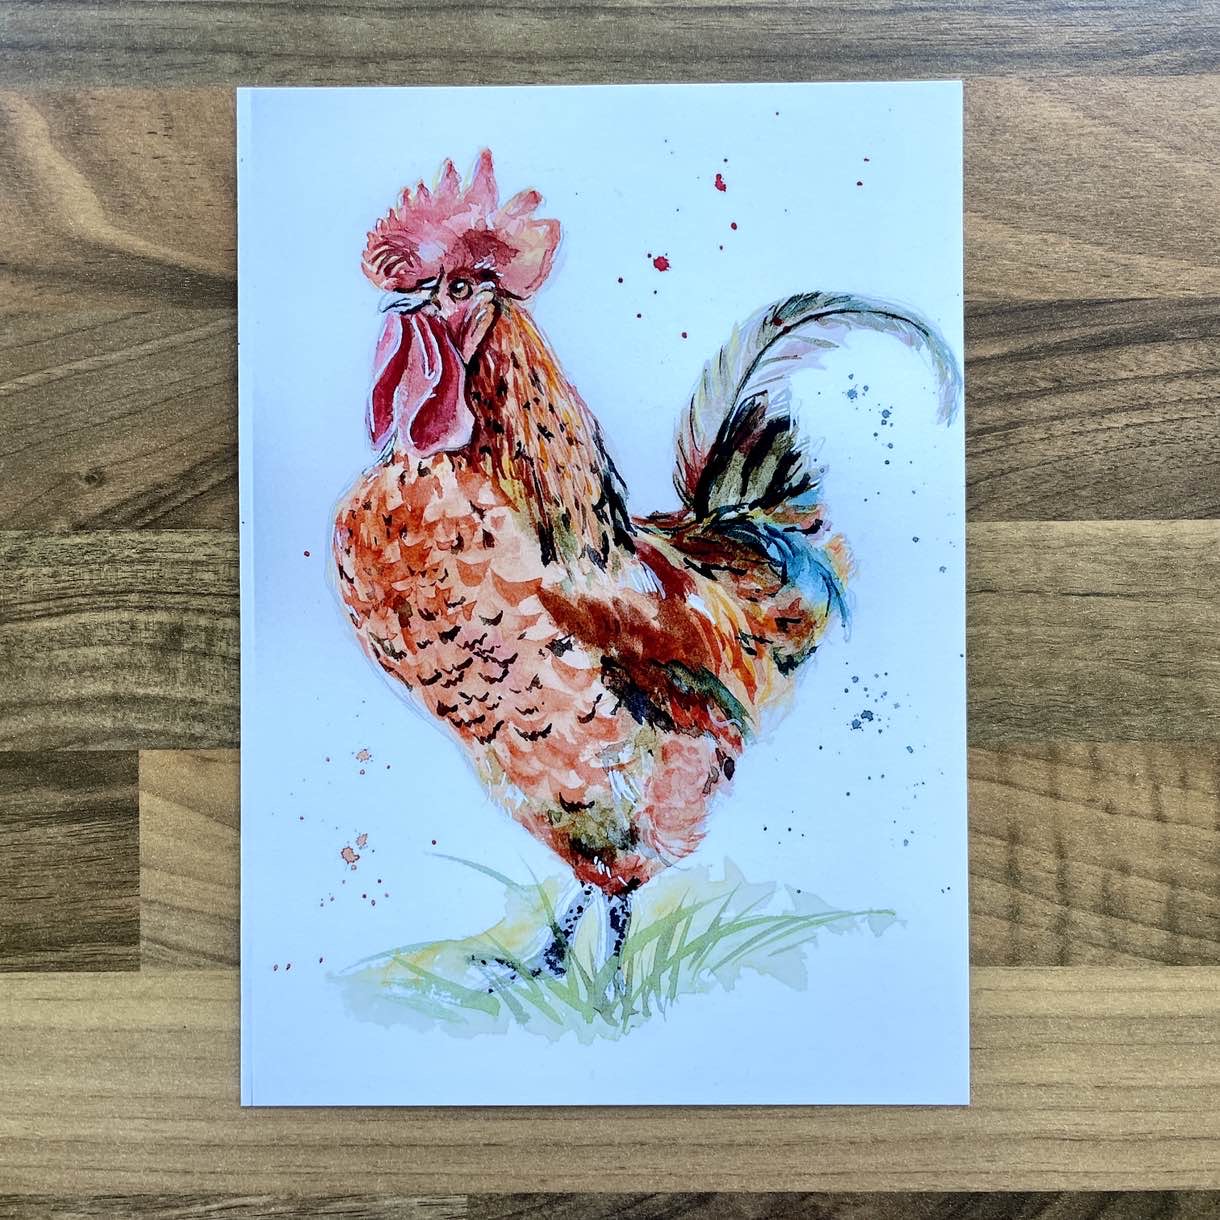 Watercolour painting of a rooster standing in long grass